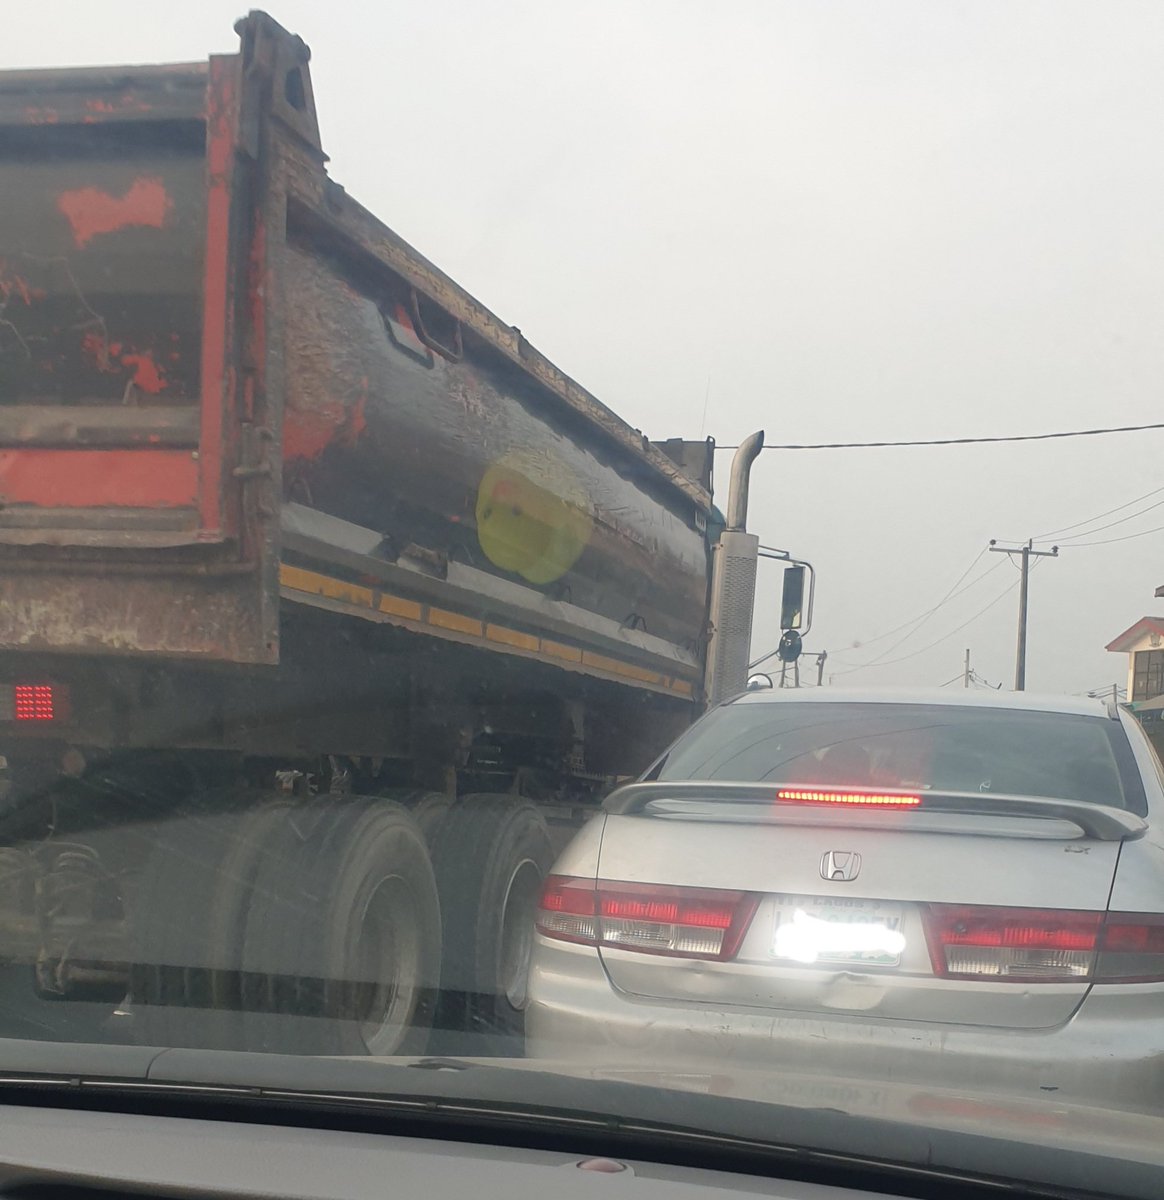 A couple got defensive cuz I got down to tell them they can't have a toddler's head sticking out of the driver's window beside a truck in traffic. 

They put her in the back after chopping small insort sha. 
Pikin wey people dey find, God carry 3 give 2 idiots.

#BetterParenting